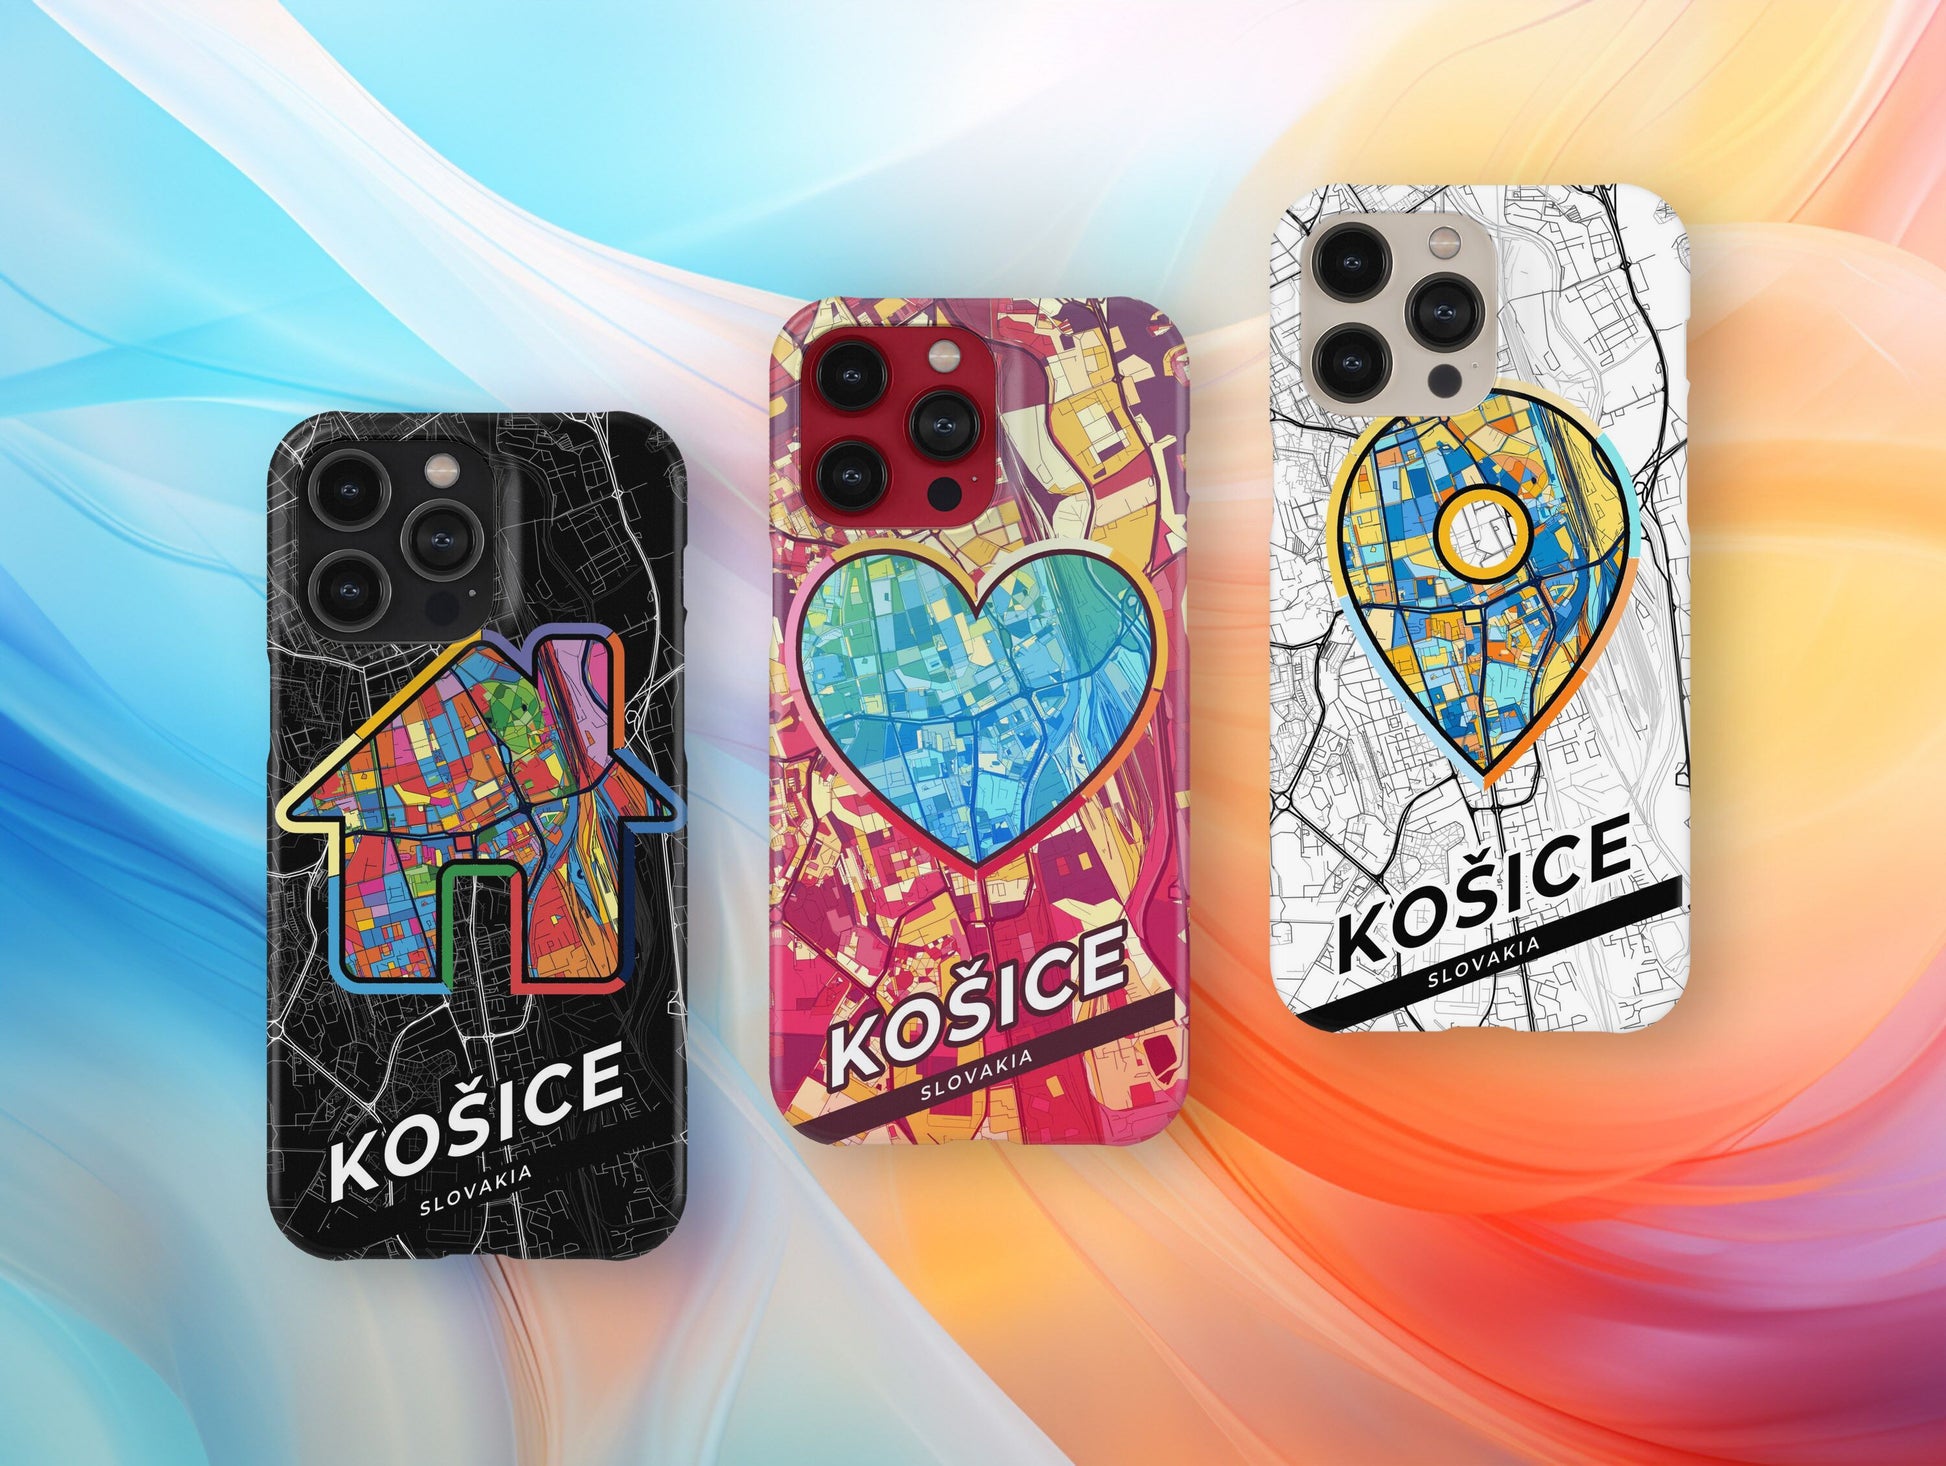 Košice Slovakia slim phone case with colorful icon. Birthday, wedding or housewarming gift. Couple match cases.